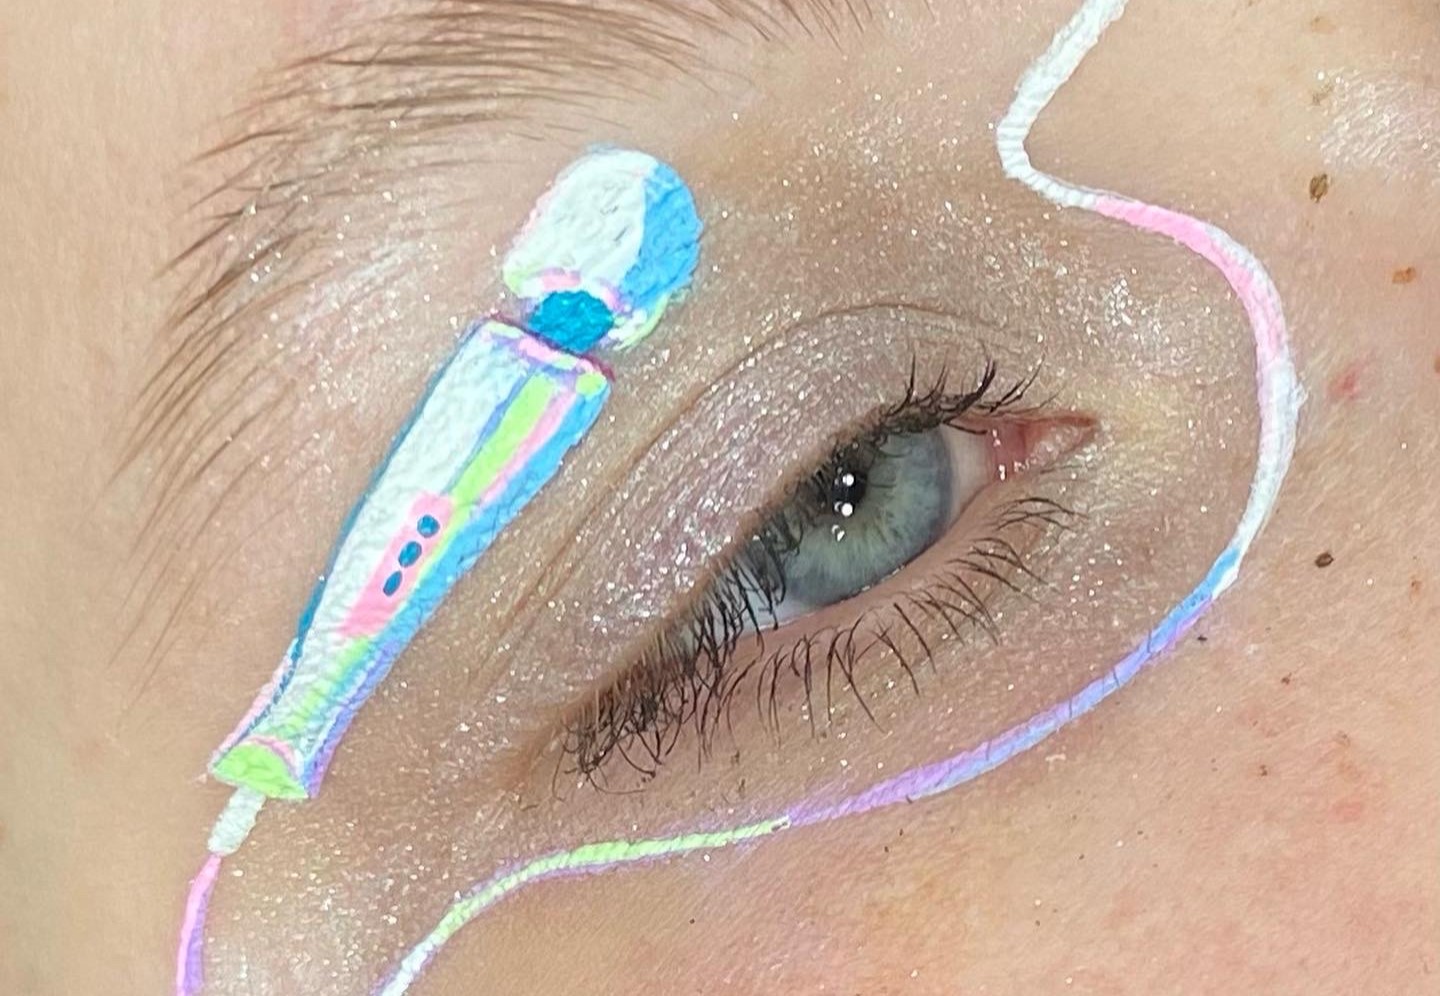 Eye makeup done by Megan Wirick featuring a white and luminescent Magic Wand painted across an eyelid.